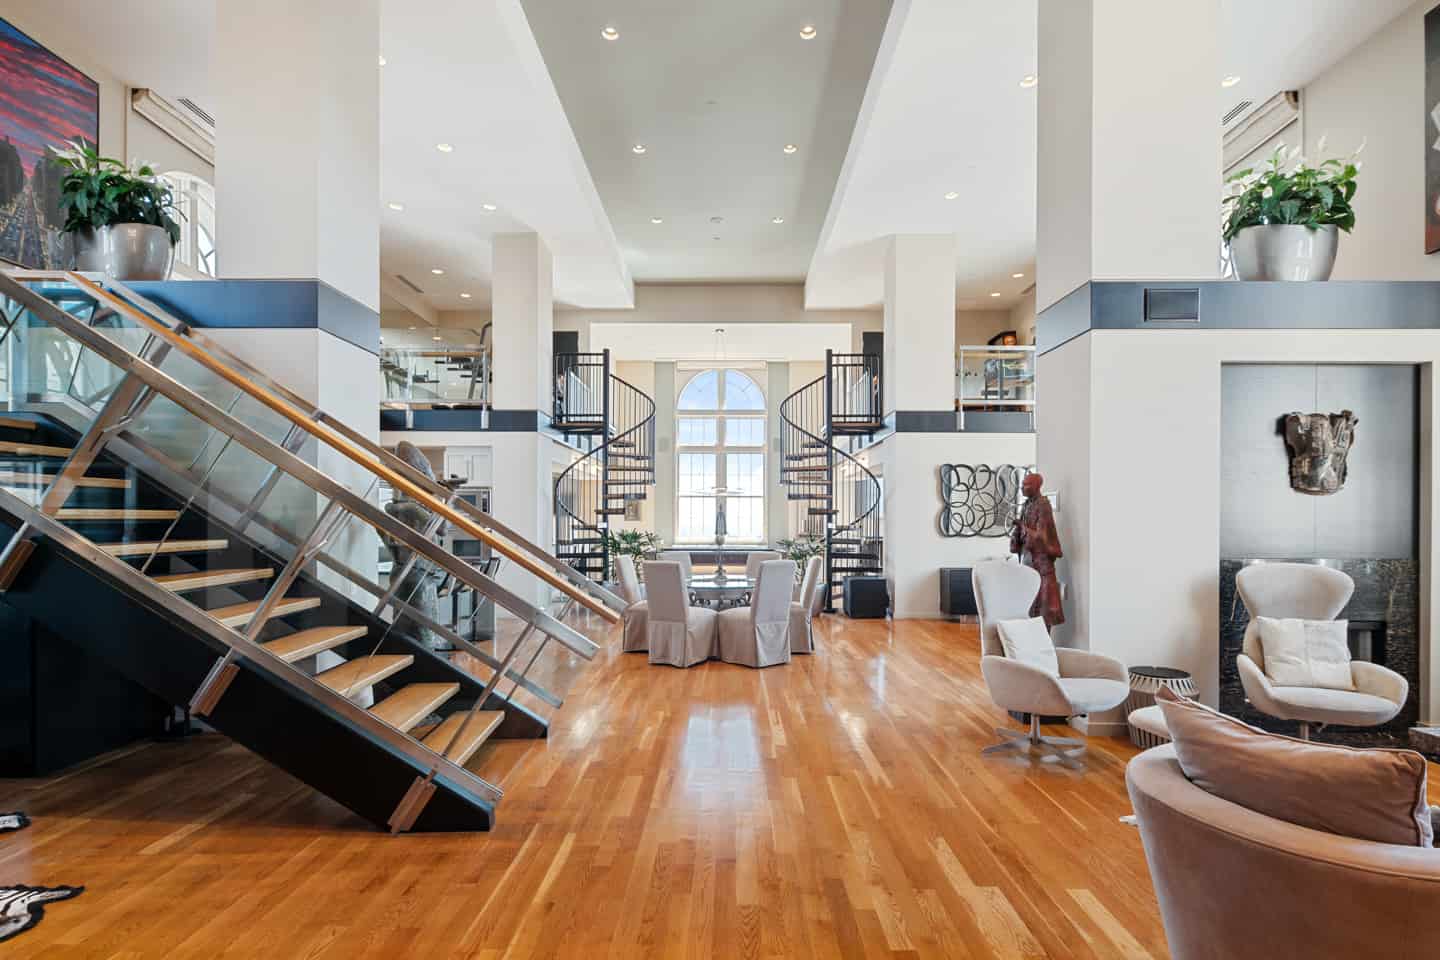 Real Estate Photographs of a Luxury Penthouse on Locust Street, in Philadelphia, PA